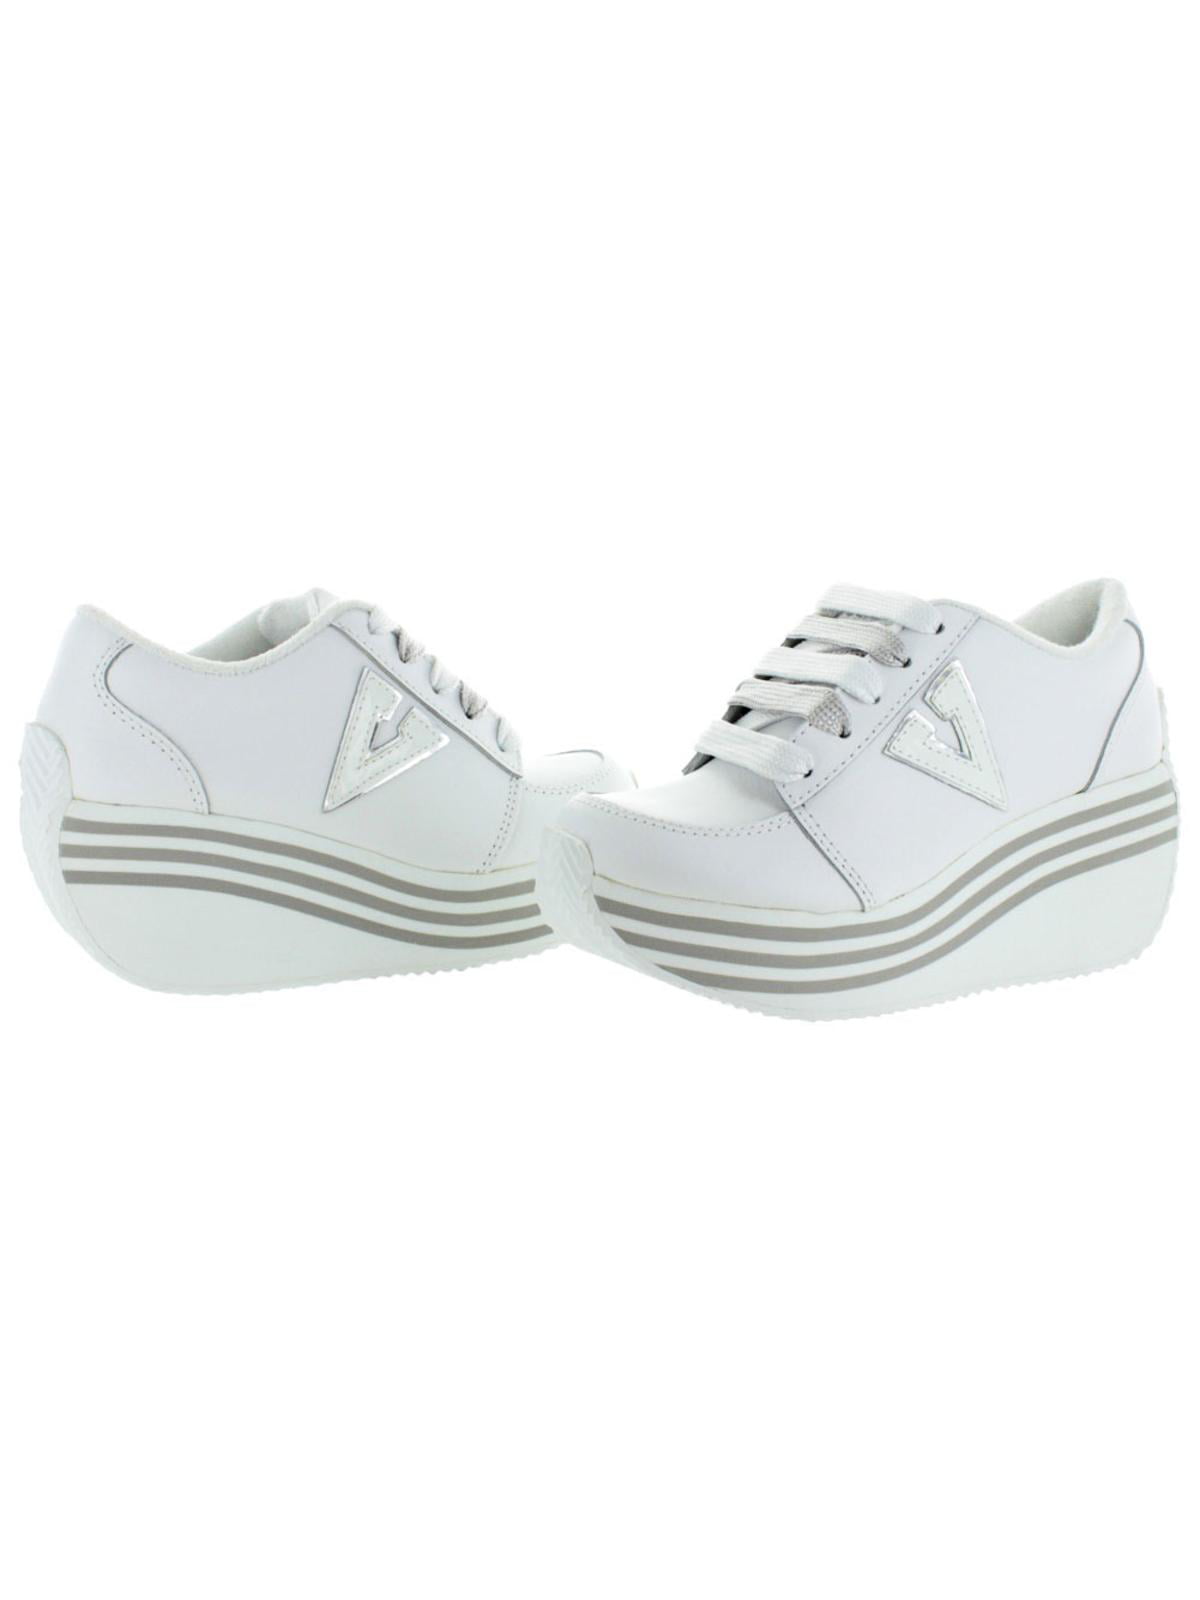 Platform Wedge Sneakers White Size 